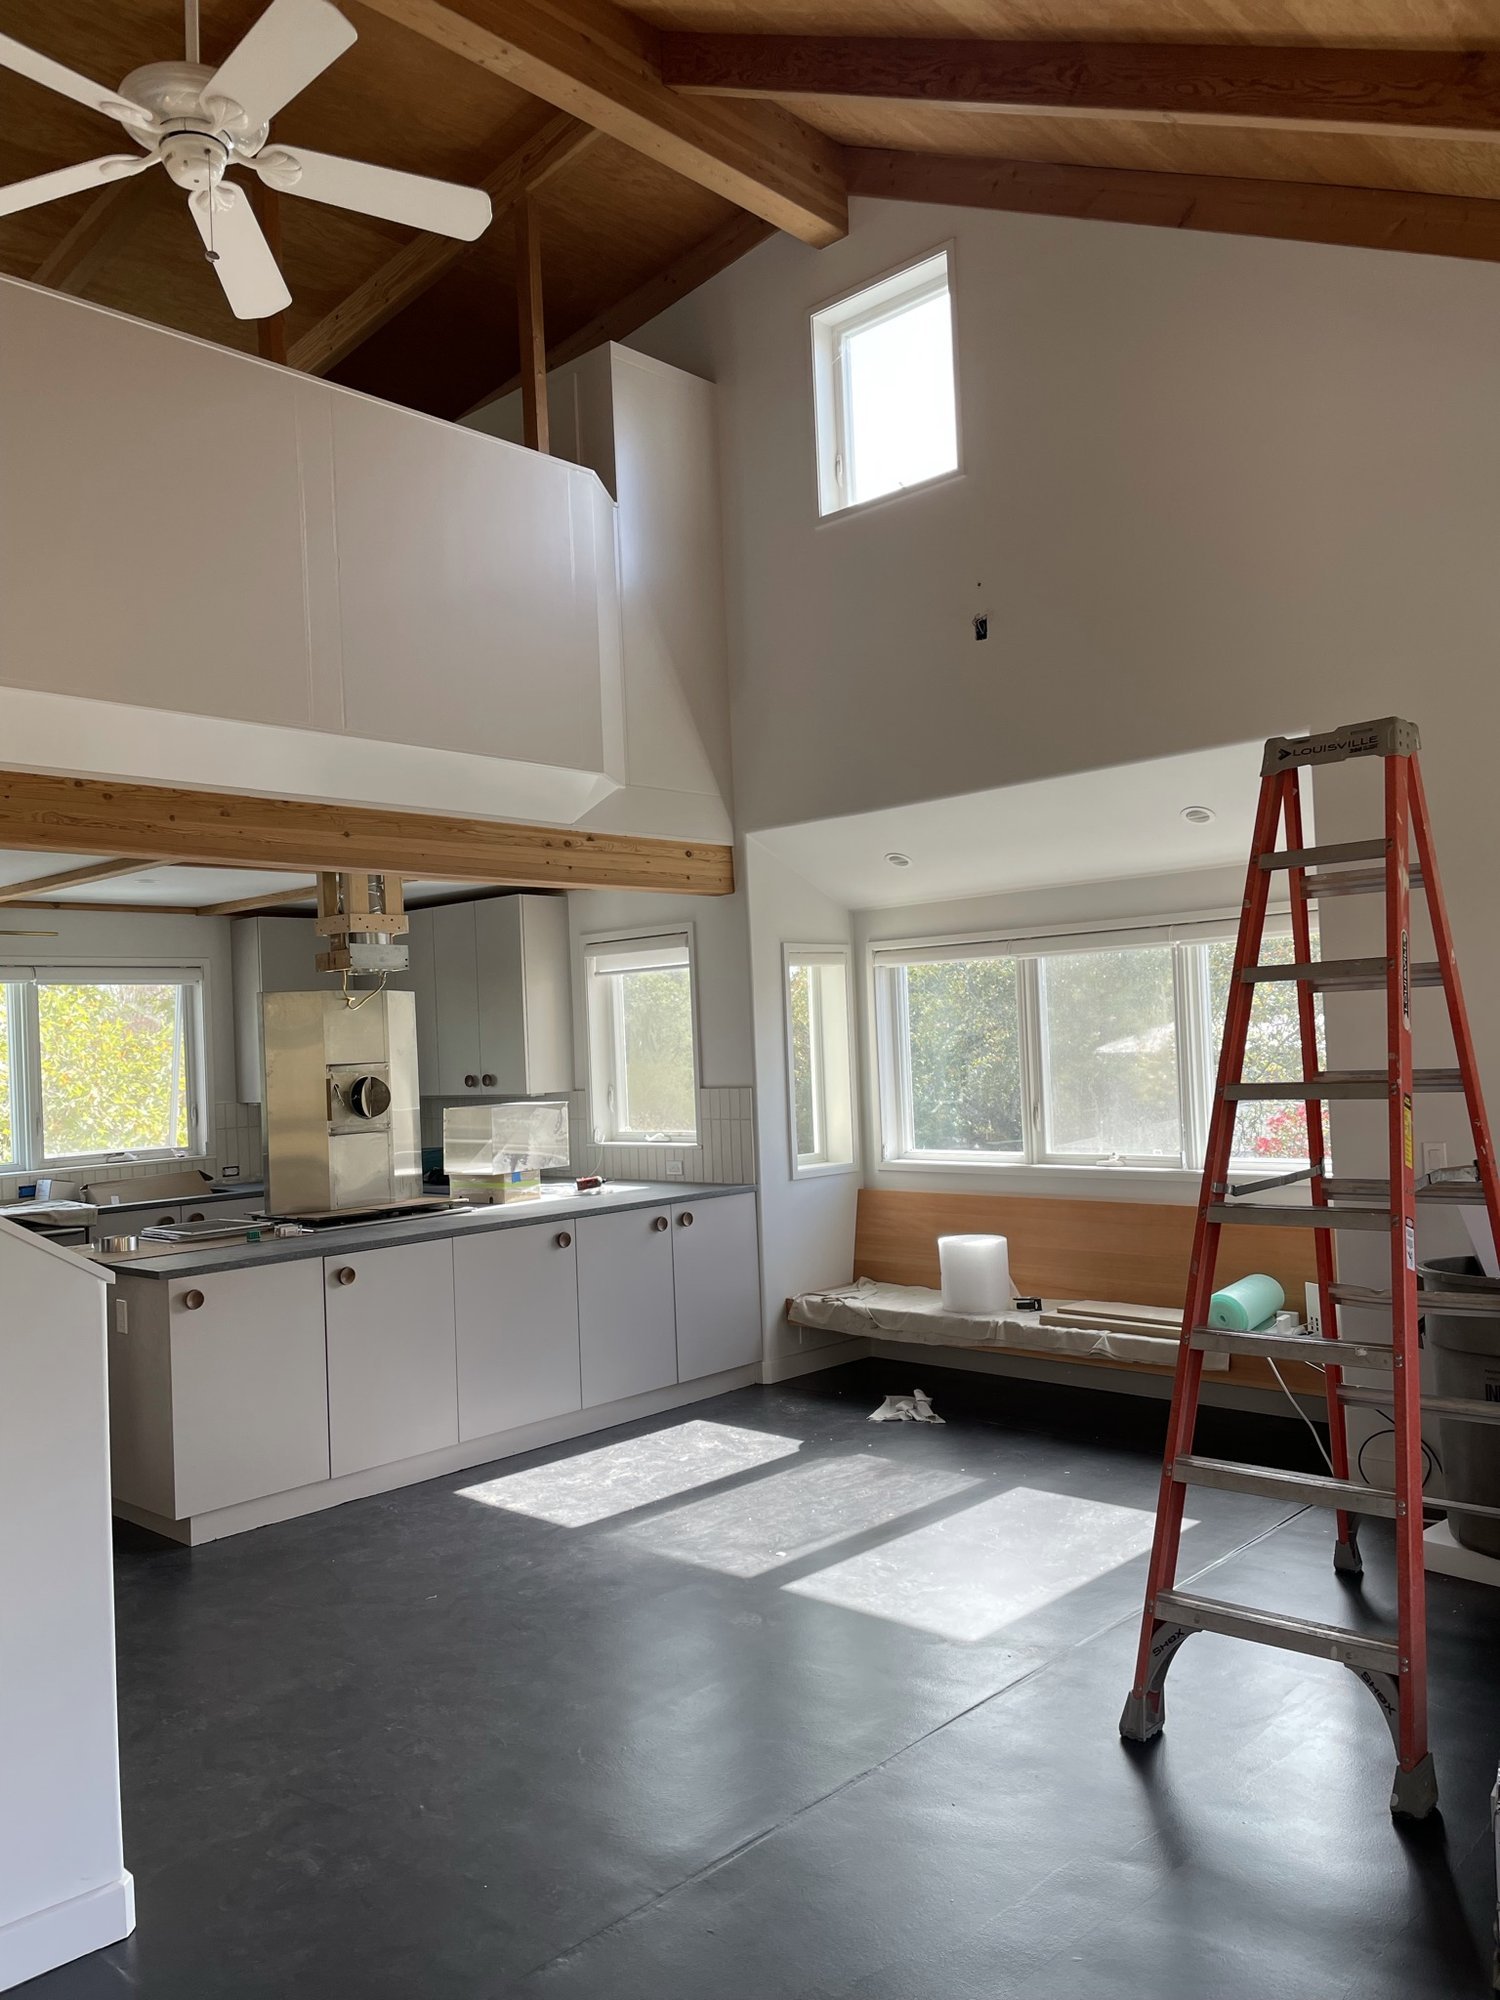  A progress image of a living space under construction. There is a ladder in one corner and a built-in bench under construction below a window. The kitchen cabinet extends to separate the living from kitchen space and has white cabinets with large ci